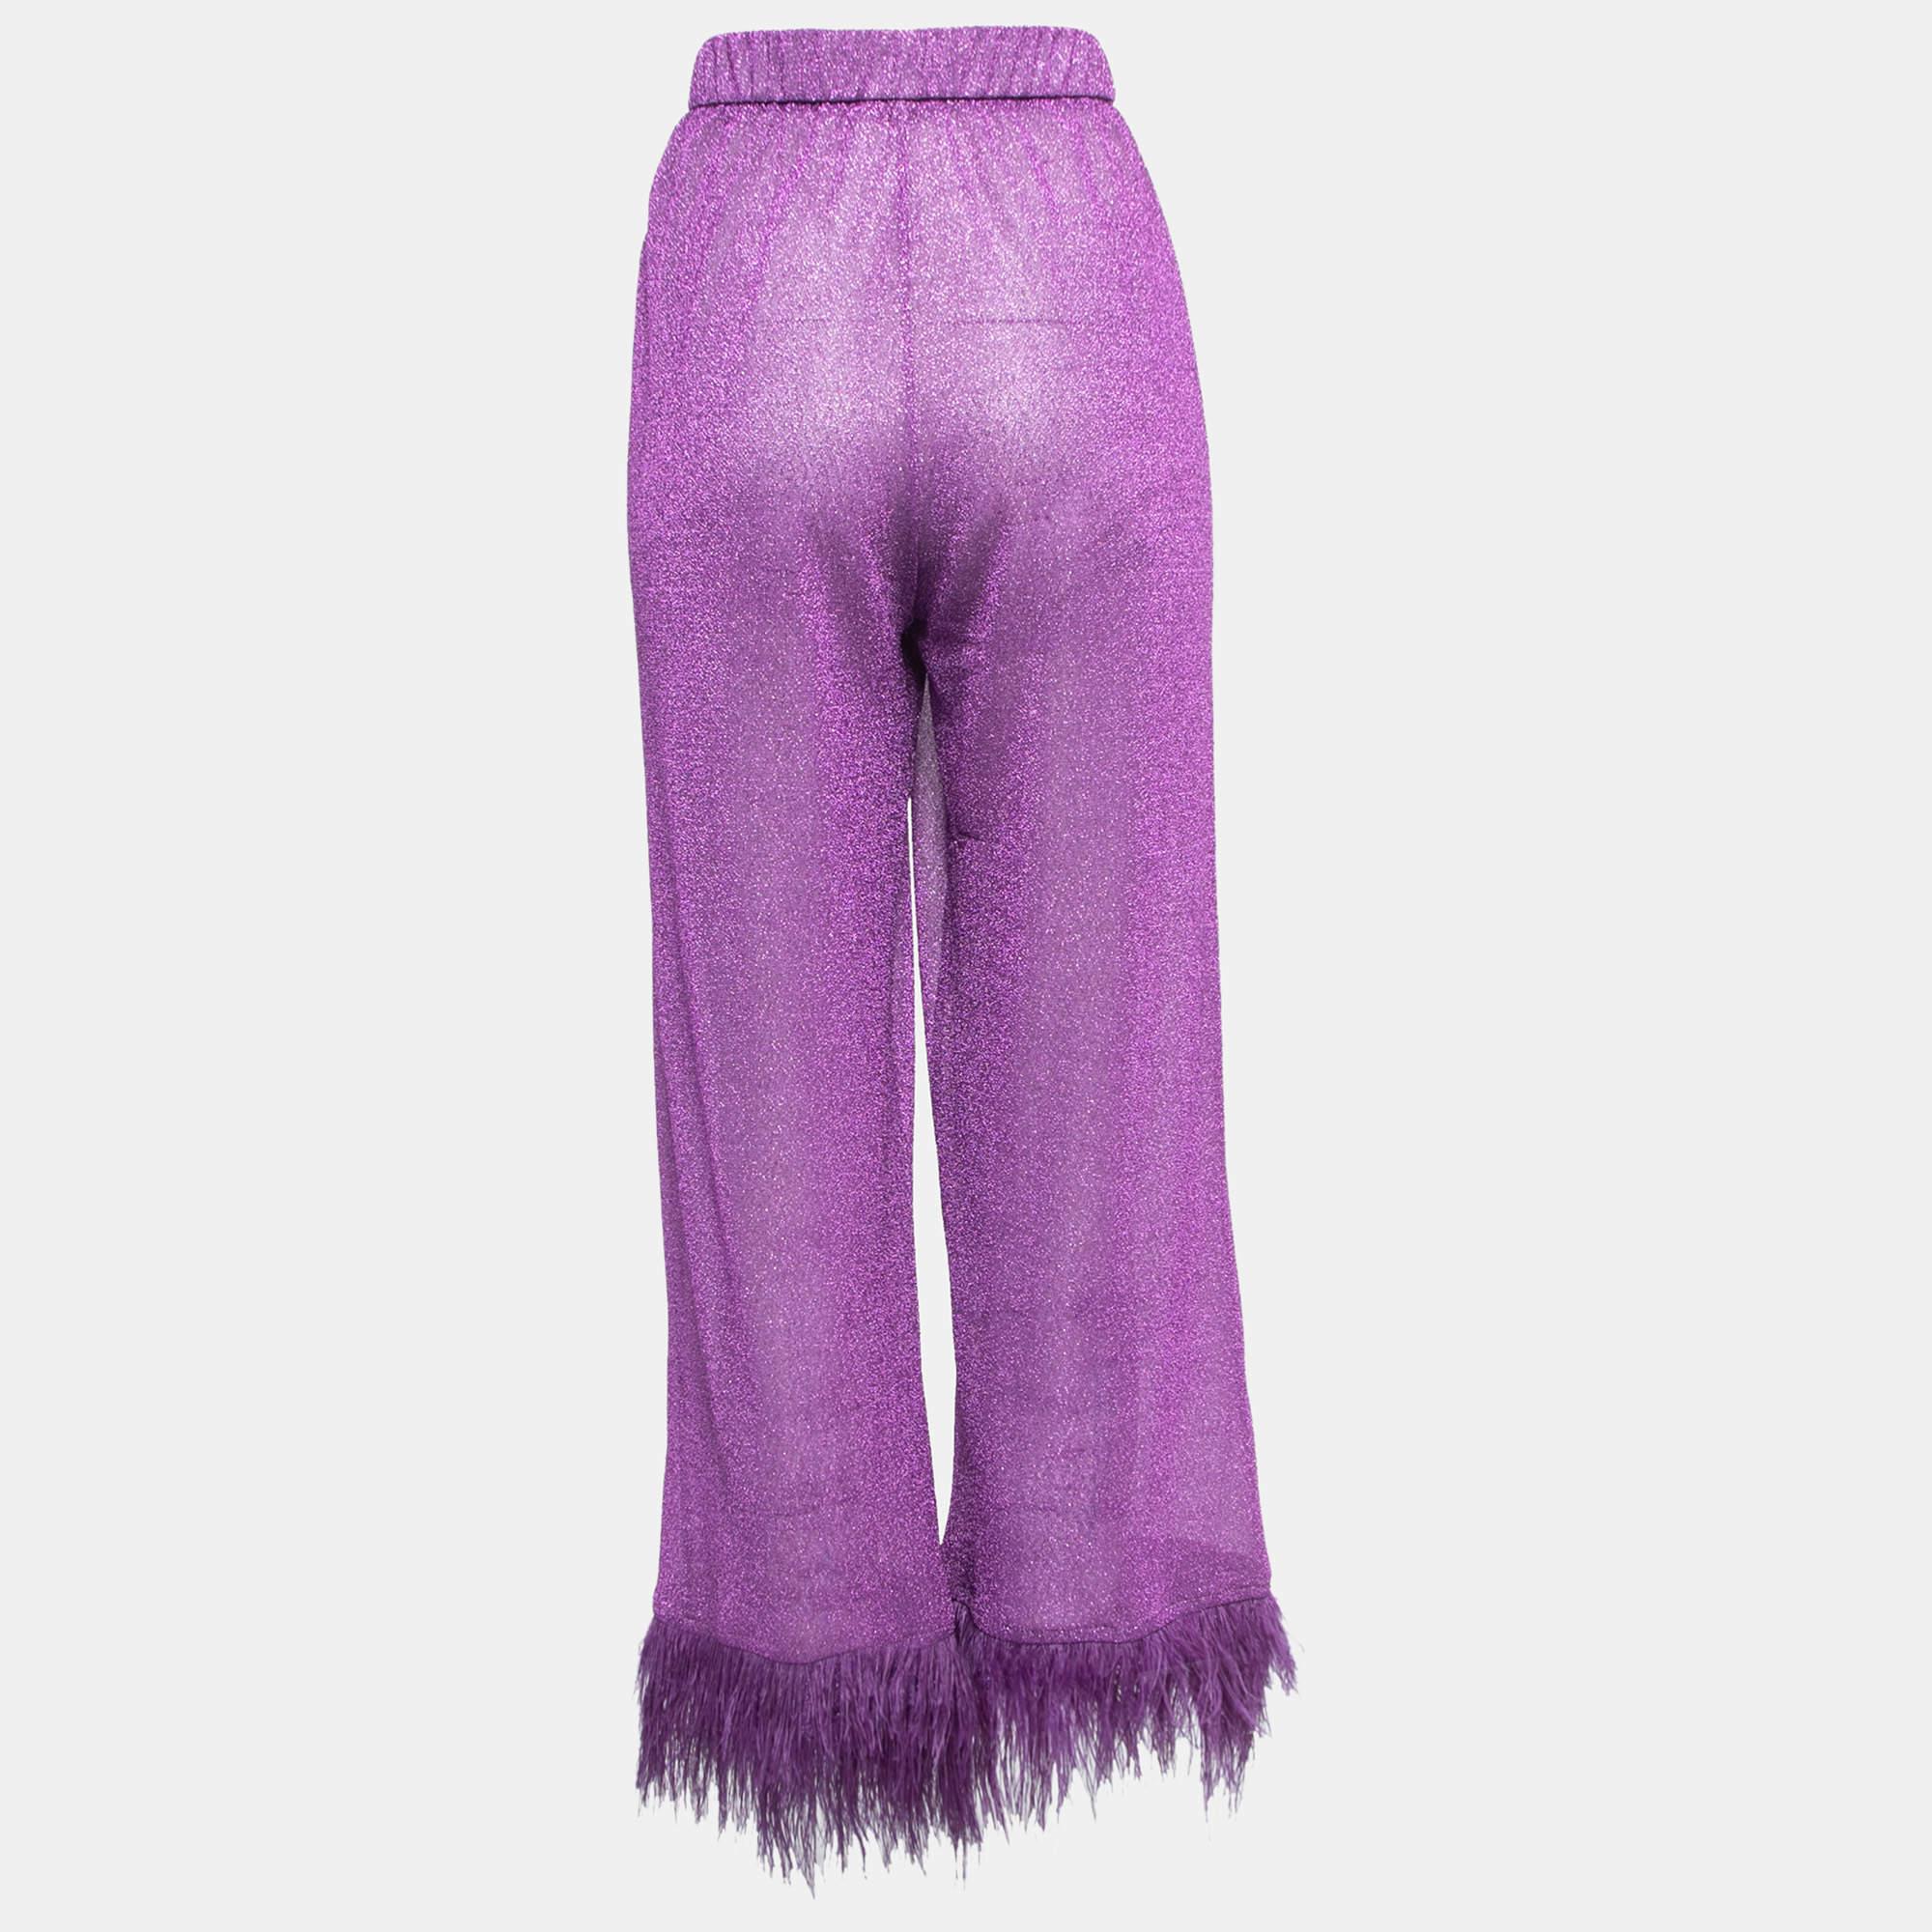 Oseree Purple Lurex Knit Feather Trim Sheer Trousers S In Good Condition For Sale In Dubai, Al Qouz 2